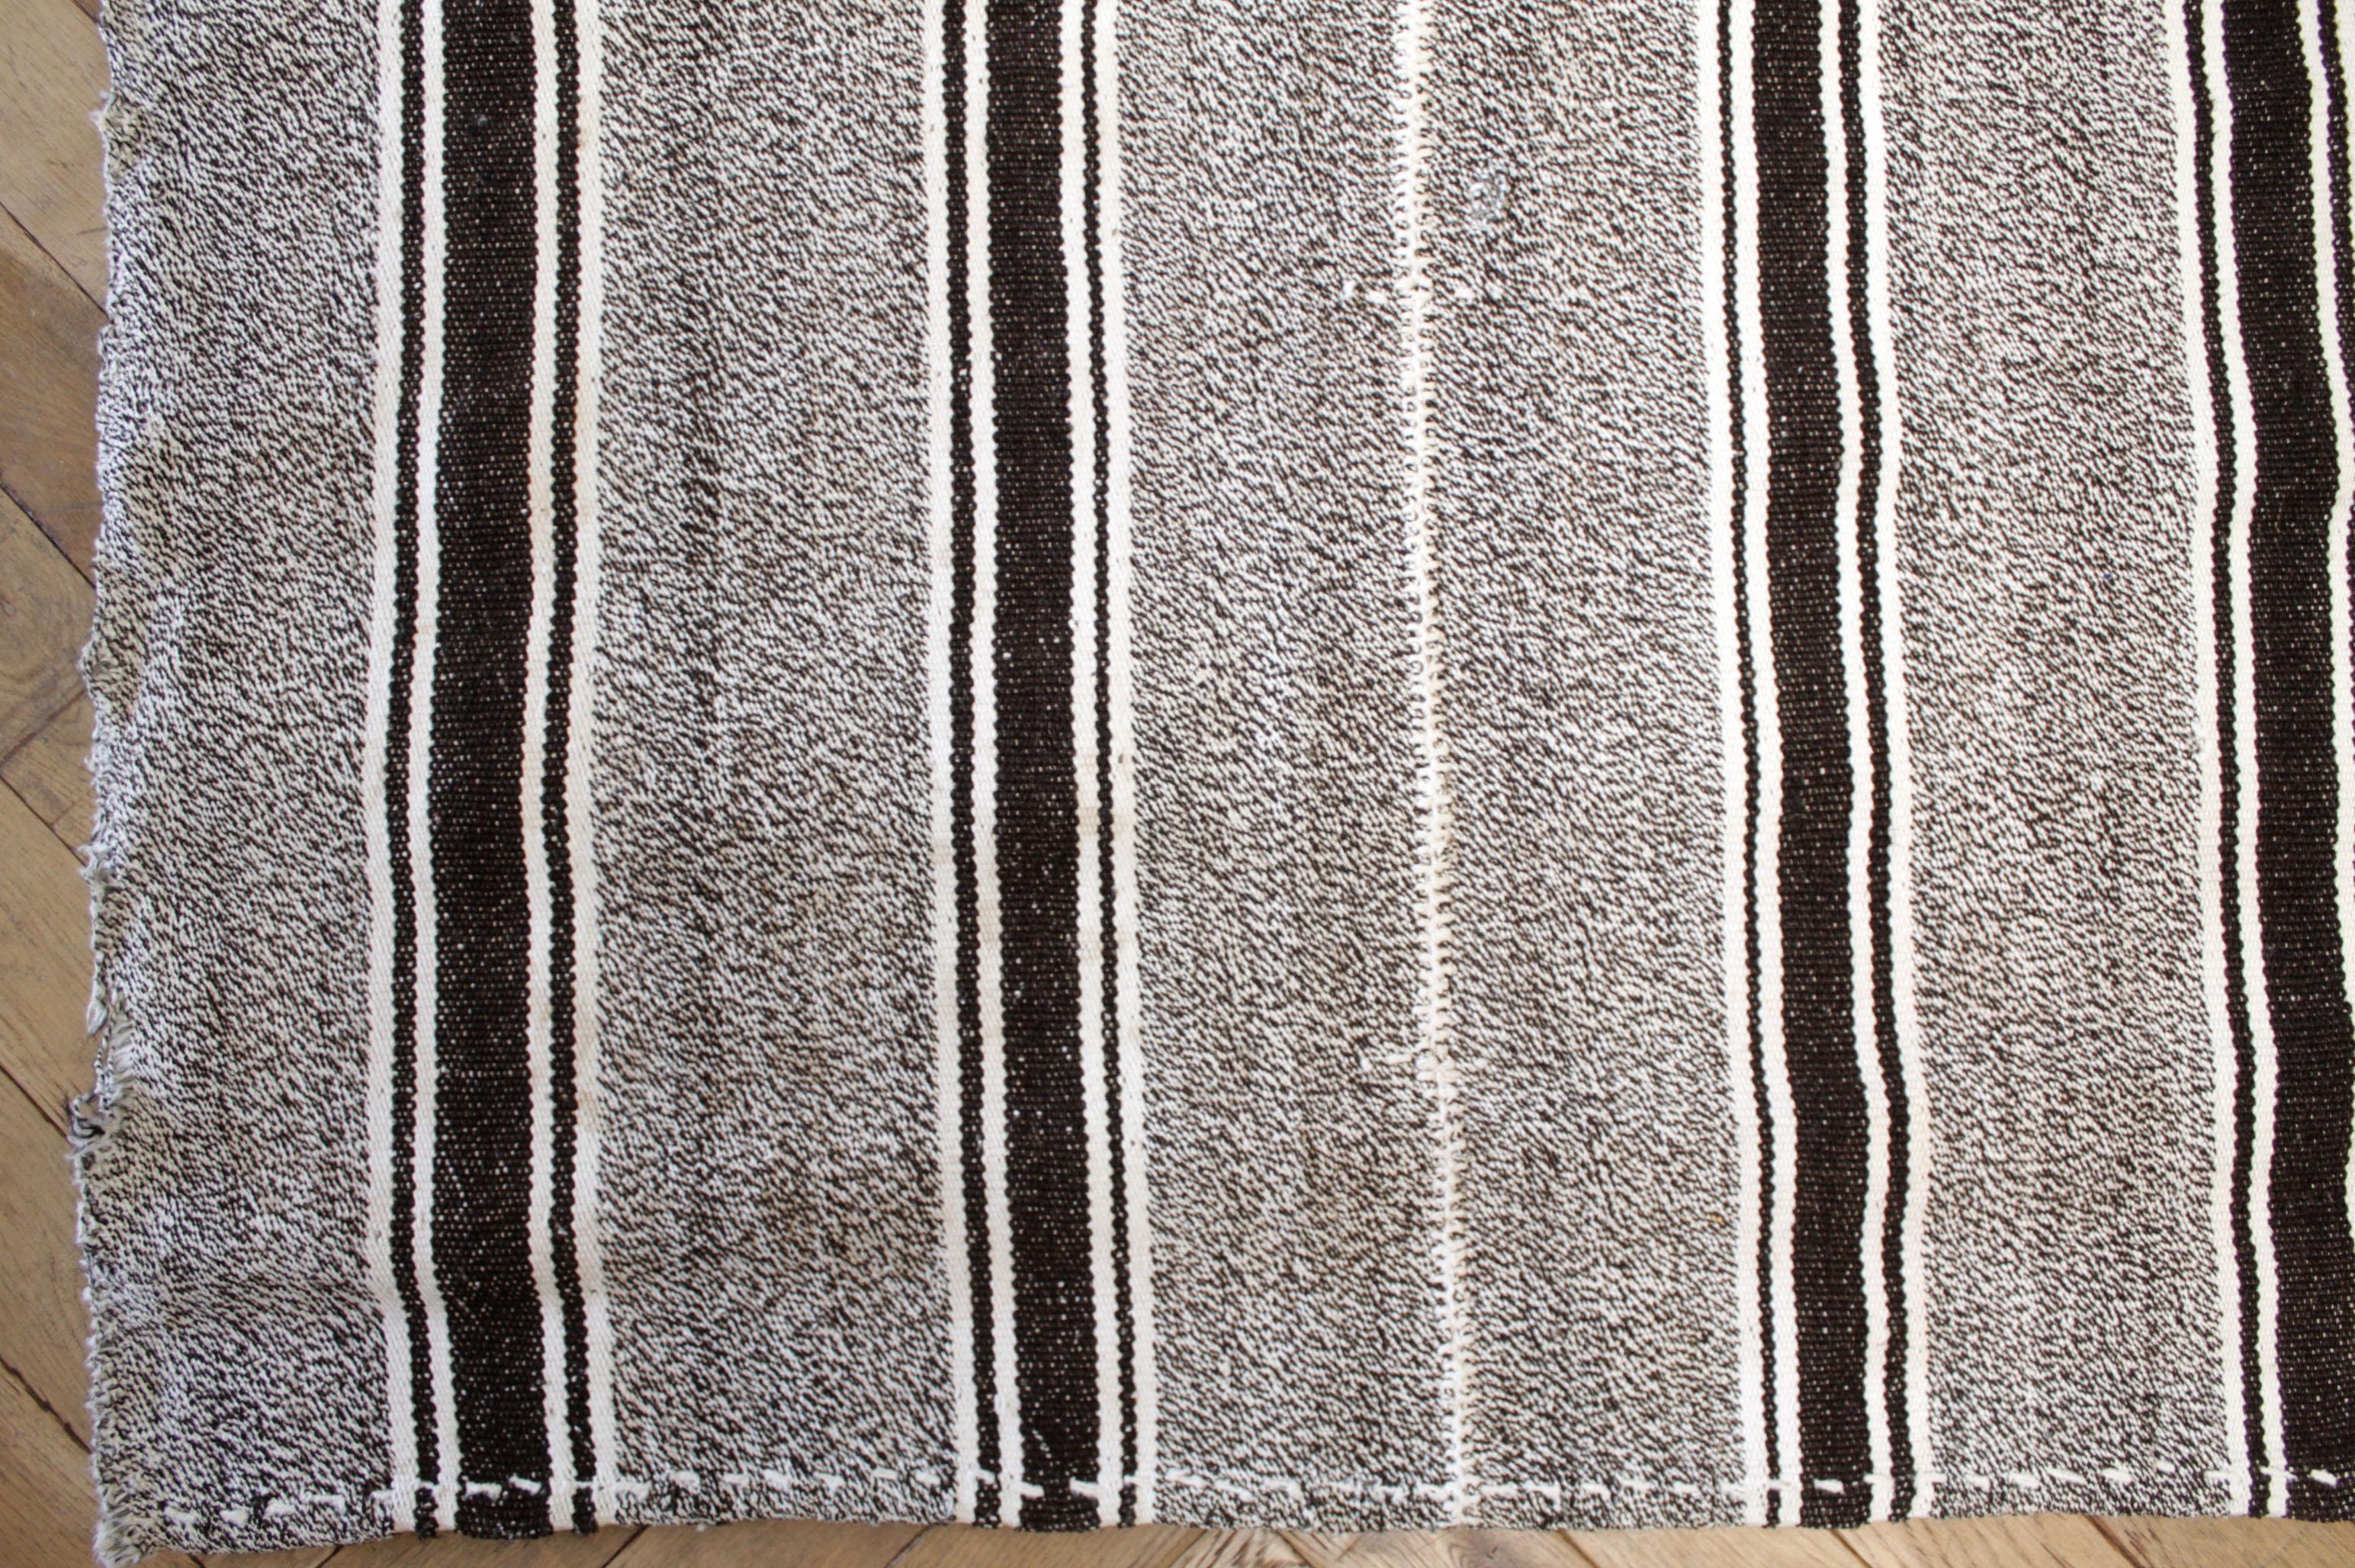 Peyton rug
Vintage Turkish rug in brown with white weave and creamy white stripes, with dark brown stripes.
Flat-weave, wool and goat hair, make these extremely durable with great use for high traffic areas. This item has been cleaned, and is